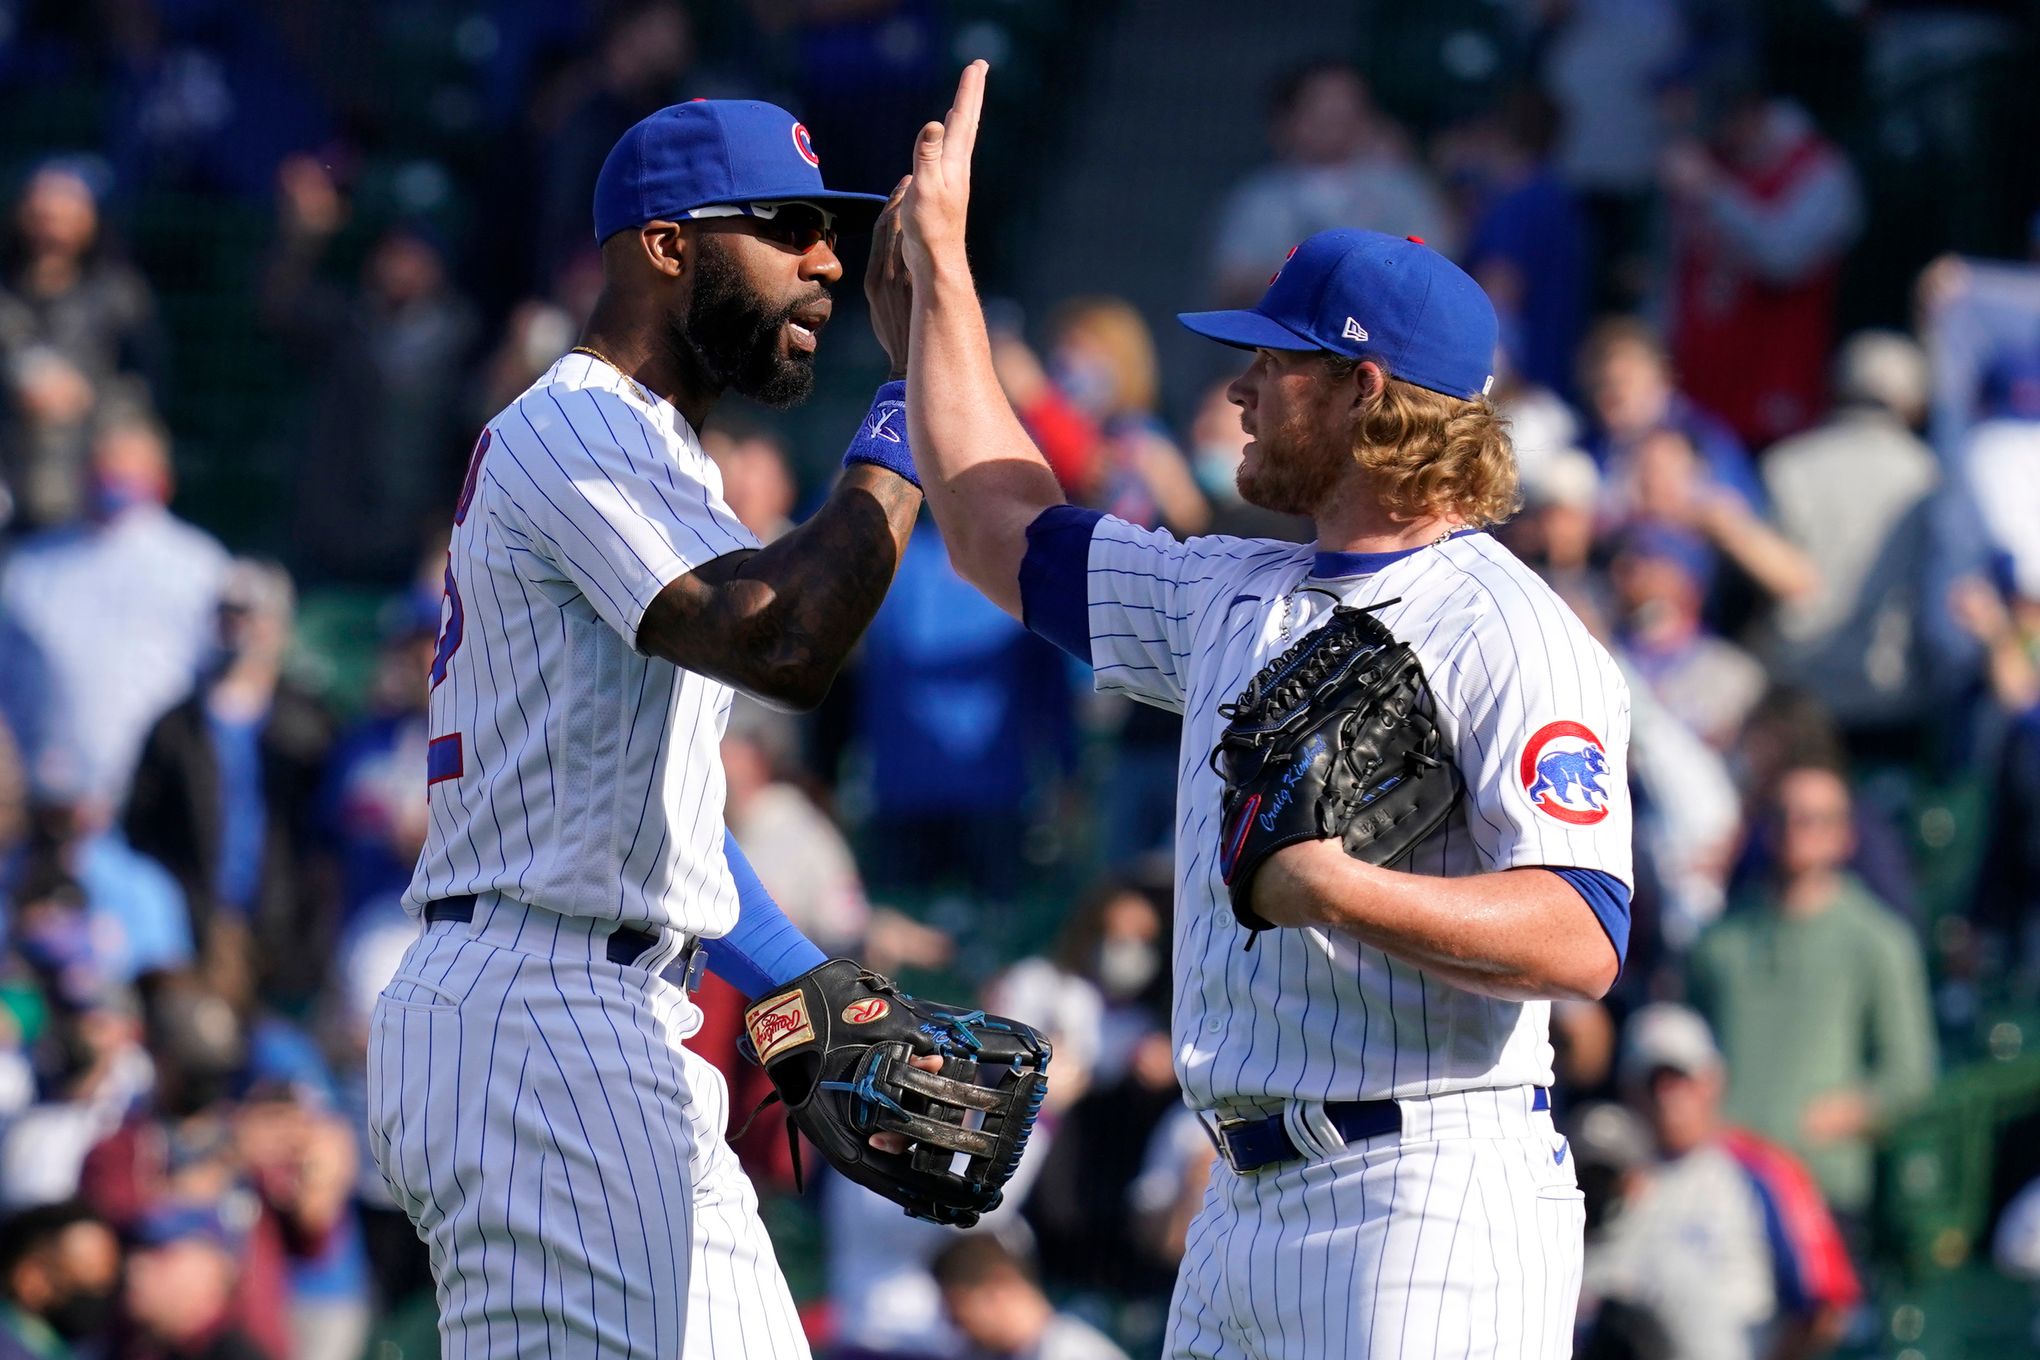 Cubs break out of slump, slip by reeling Pirates 4-2